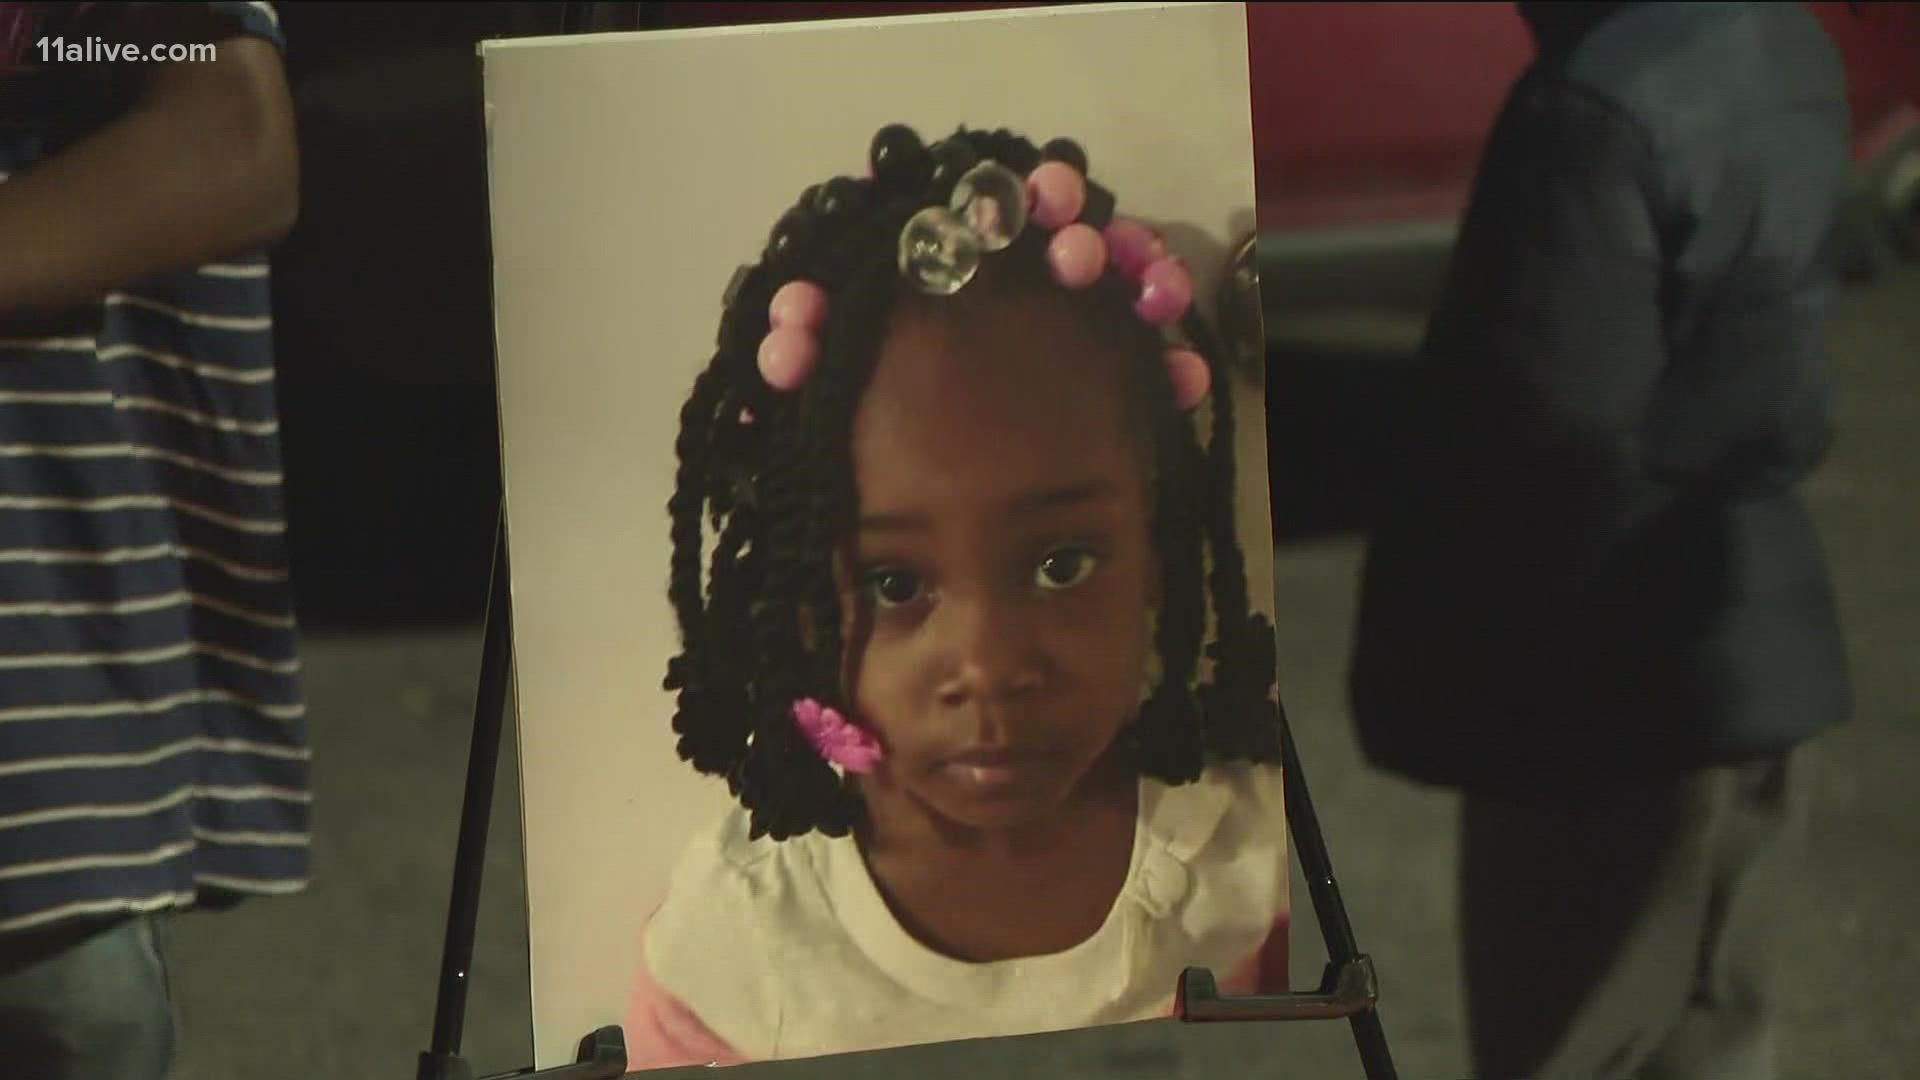 Police said Khalis was shot by her 3-year-old cousin. The kids found a gun that was not secured.